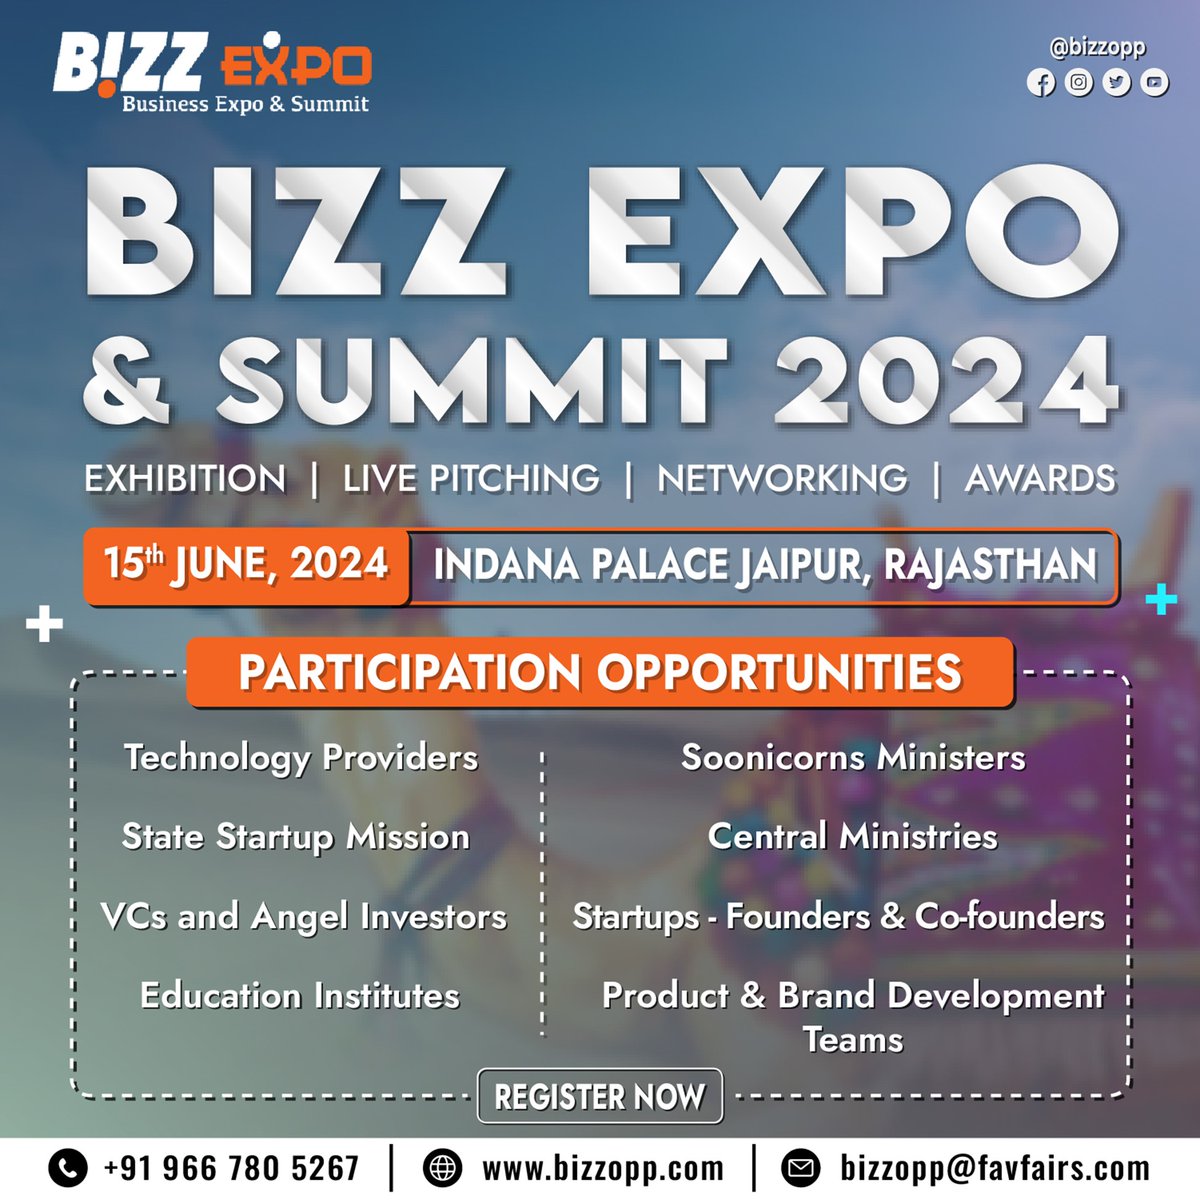 'Calling all innovators and dreamers! Don't miss the opportunity to showcase your brilliance at Bizz Expo, happening in Jaipur on June 15, 2024.  Join us as we celebrate entrepreneurship, and the spirit of innovation. 
#bizzexpo #startupexpo #entrepreneurship #innovationevent